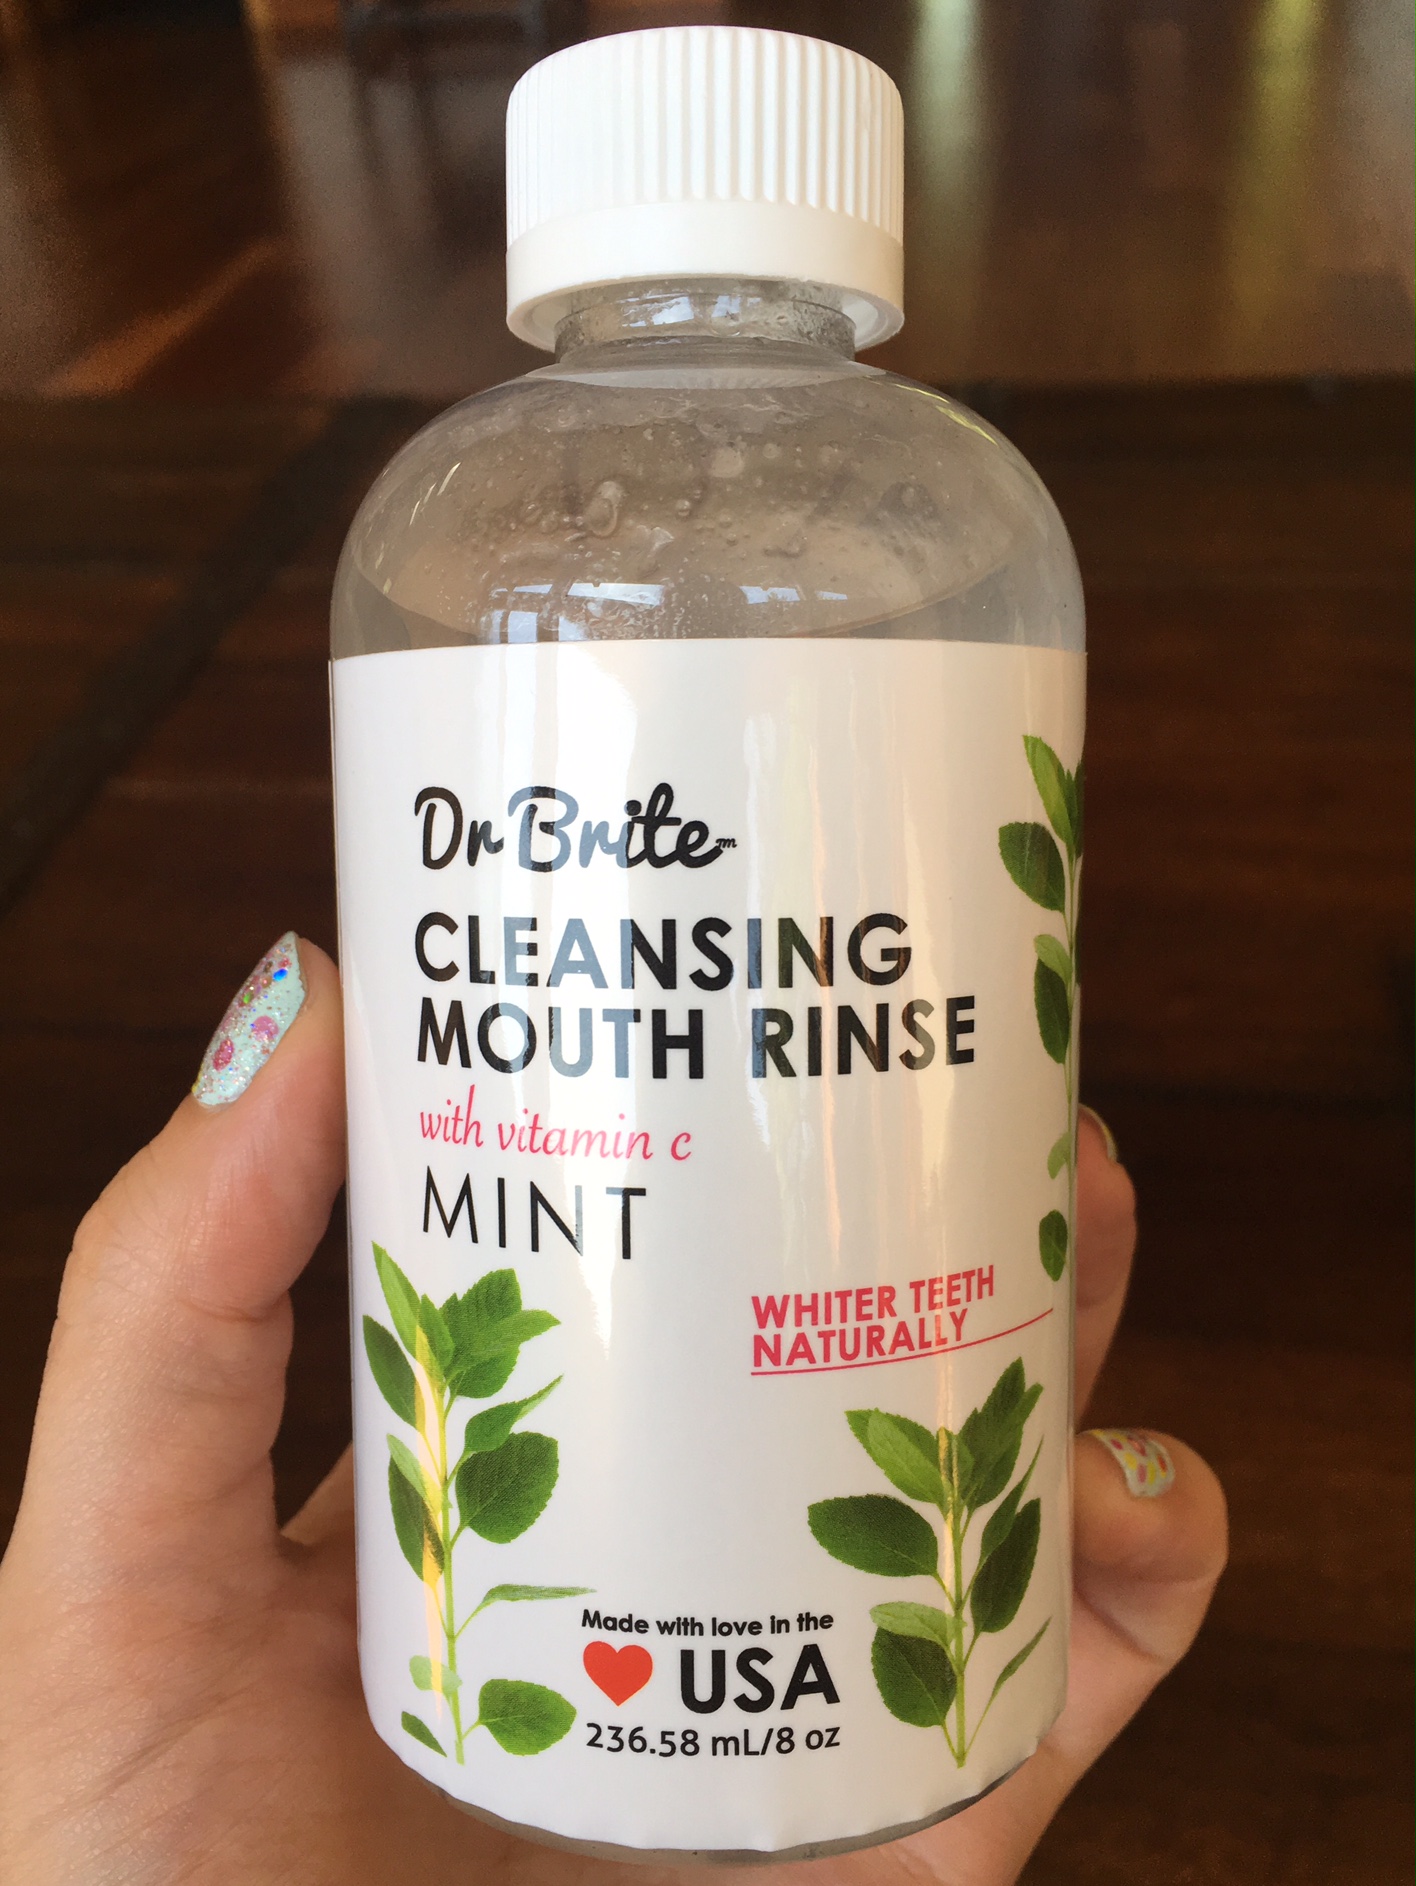 Dr Brite Cleansing Mouth Rinse